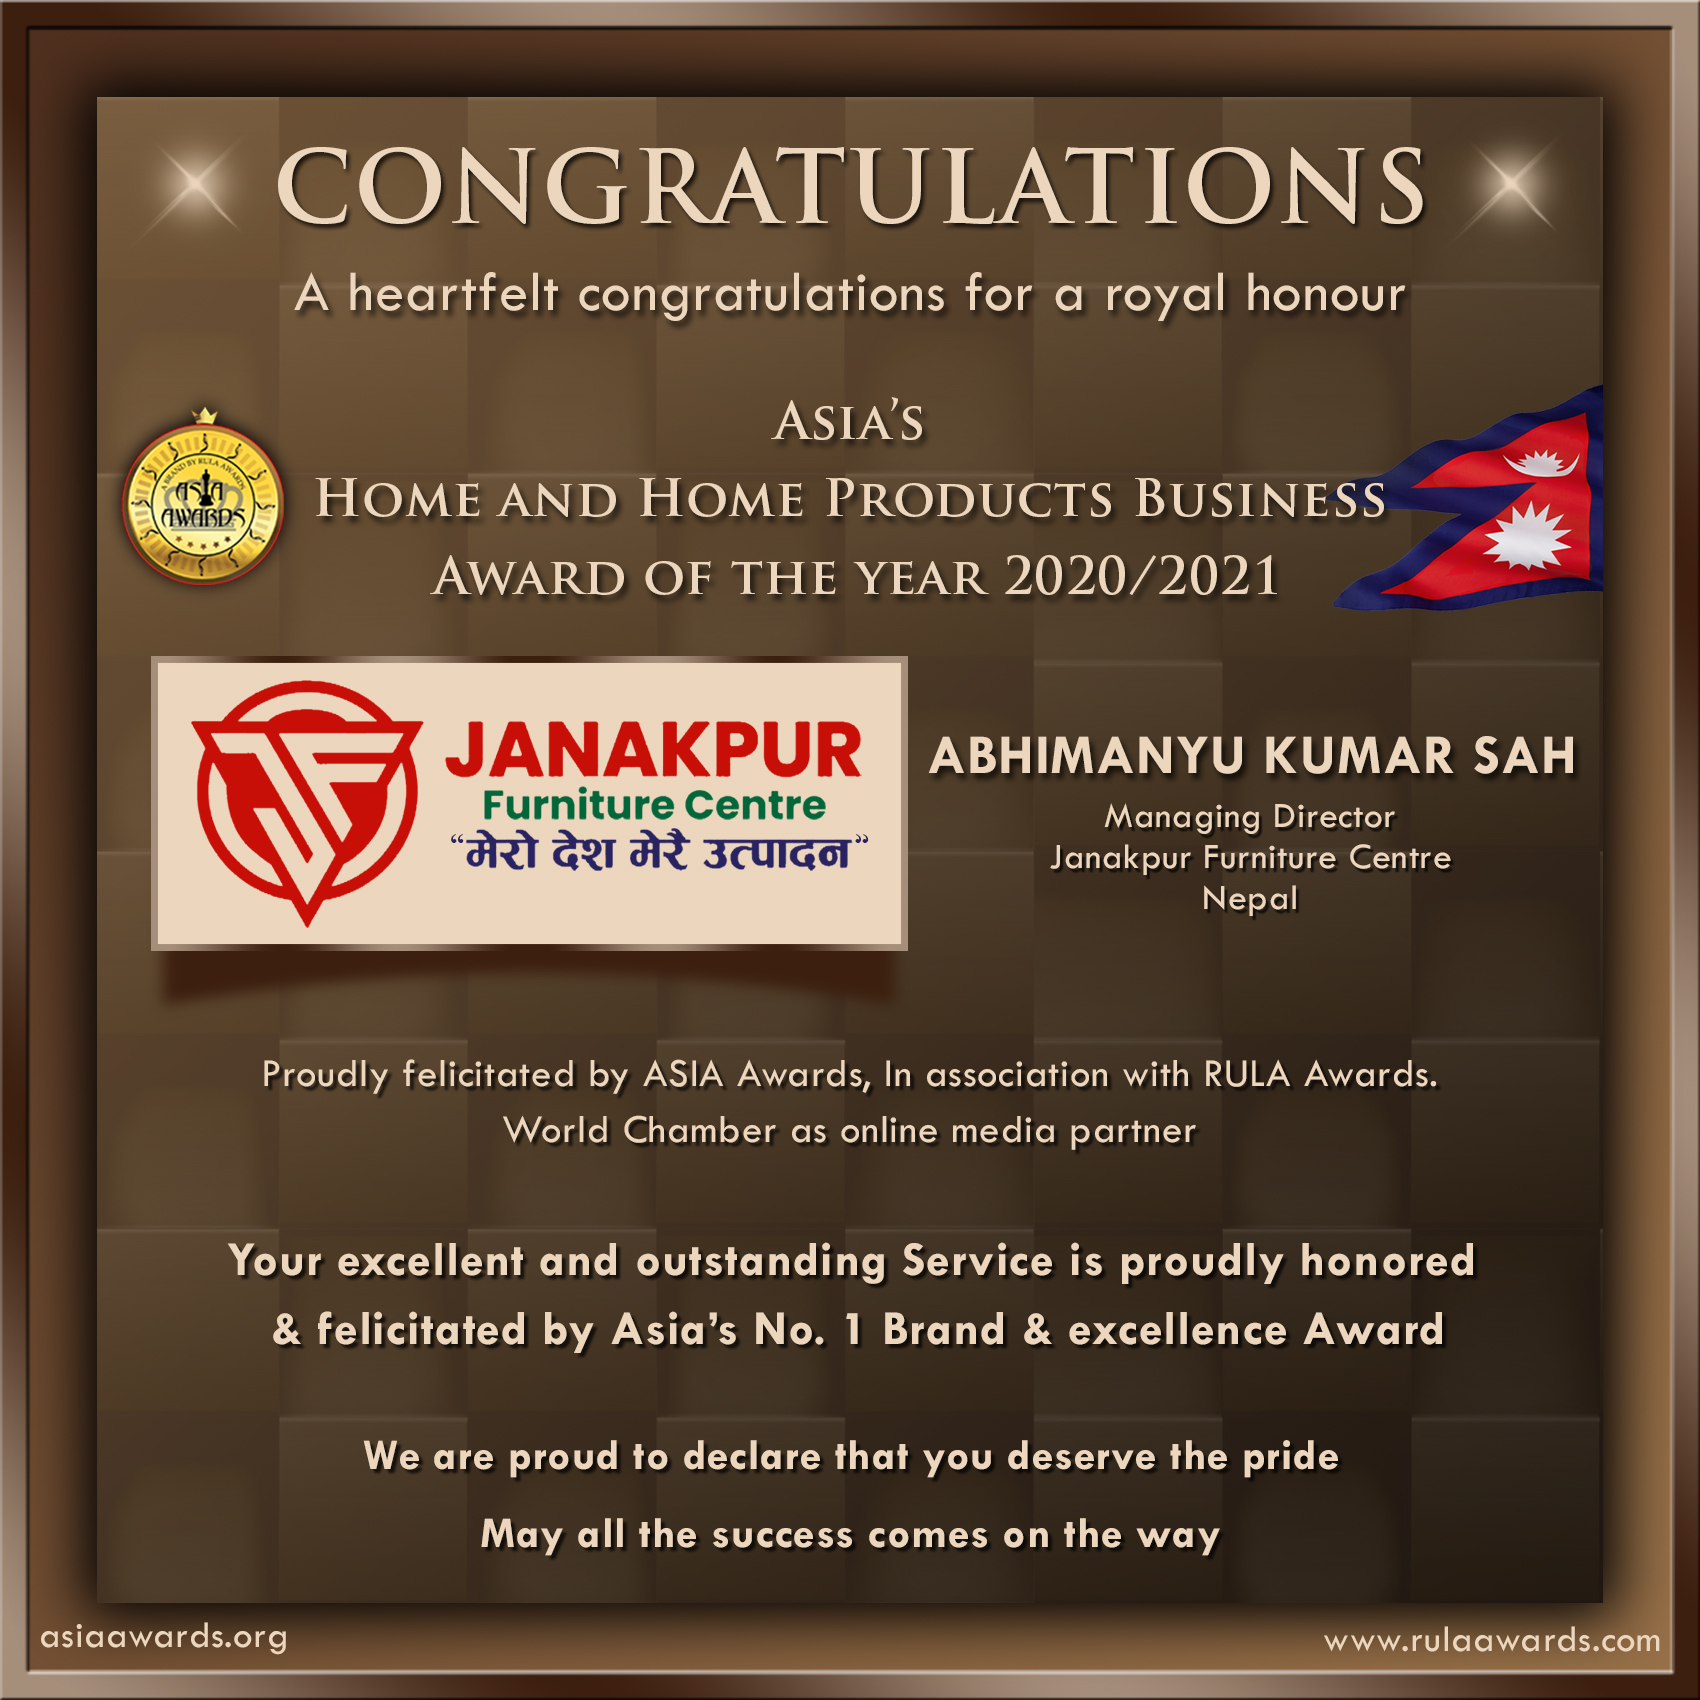 Janakpur Furniture Centre has bagged Asia's Home and home products business of the year Award